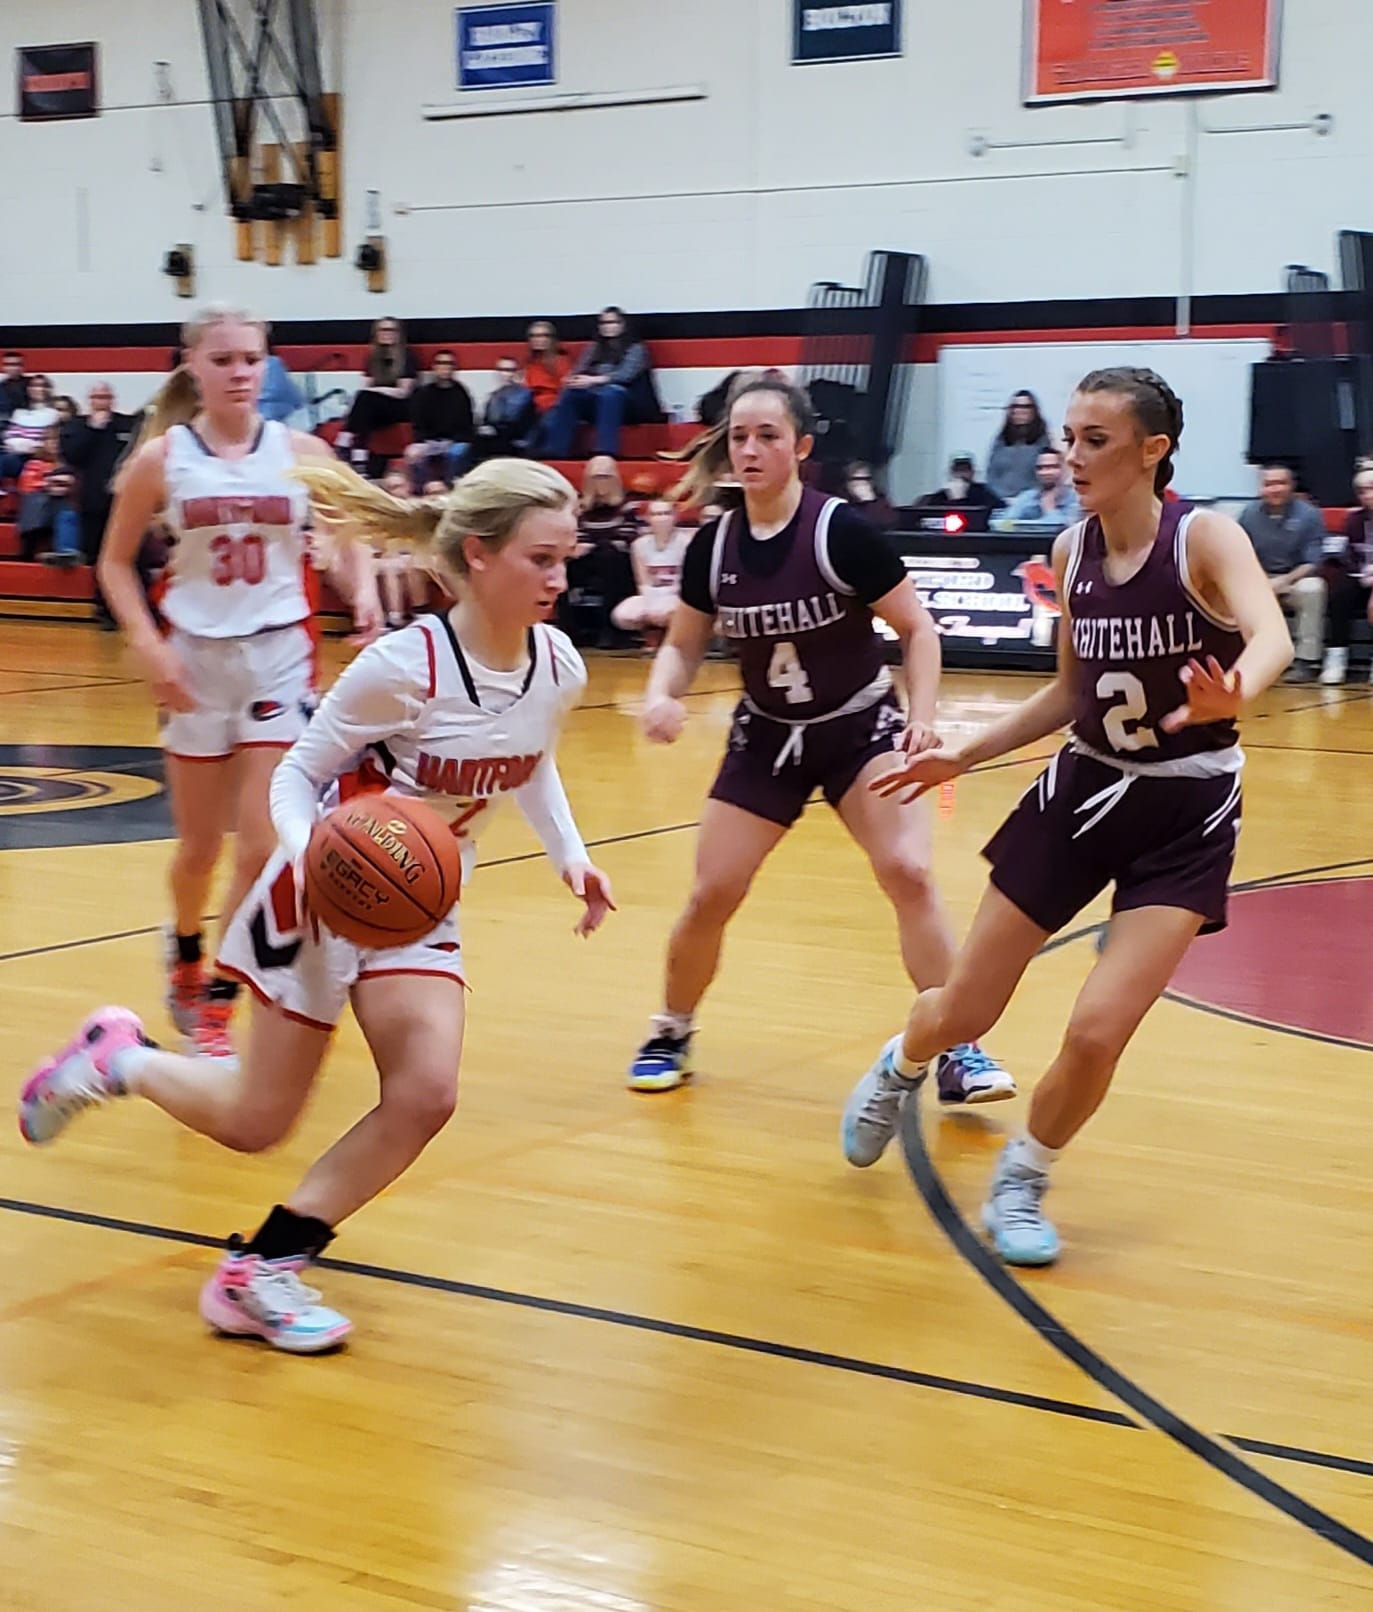 Read more about the article Tanagers Soar Past Whitehall in ADK Opener